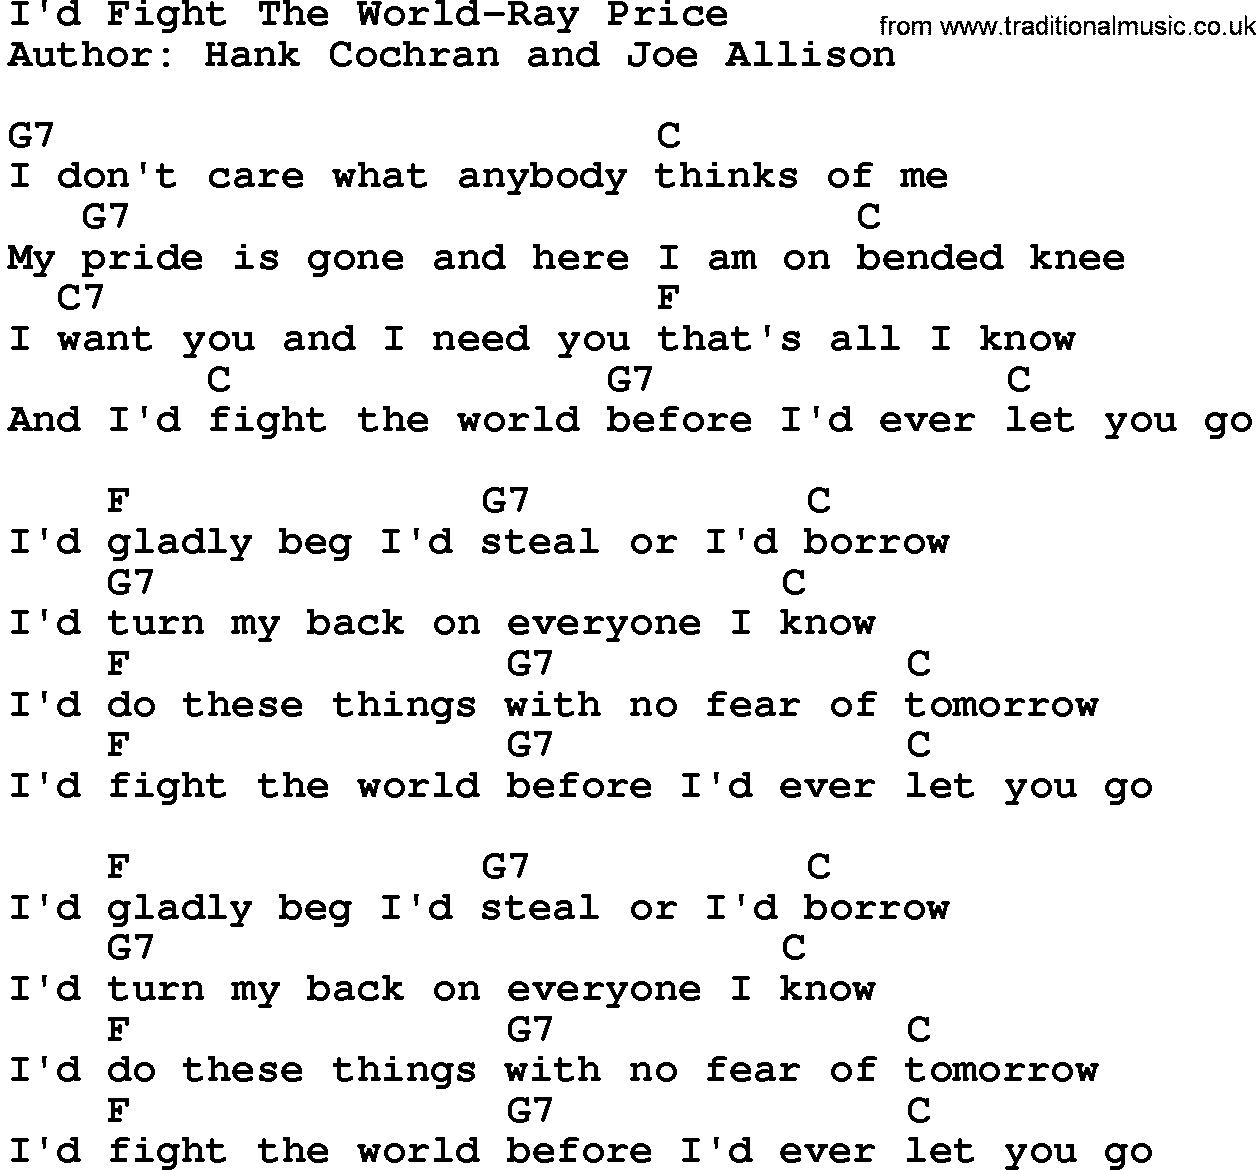 Country music song: I'd Fight The World-Ray Price lyrics and chords